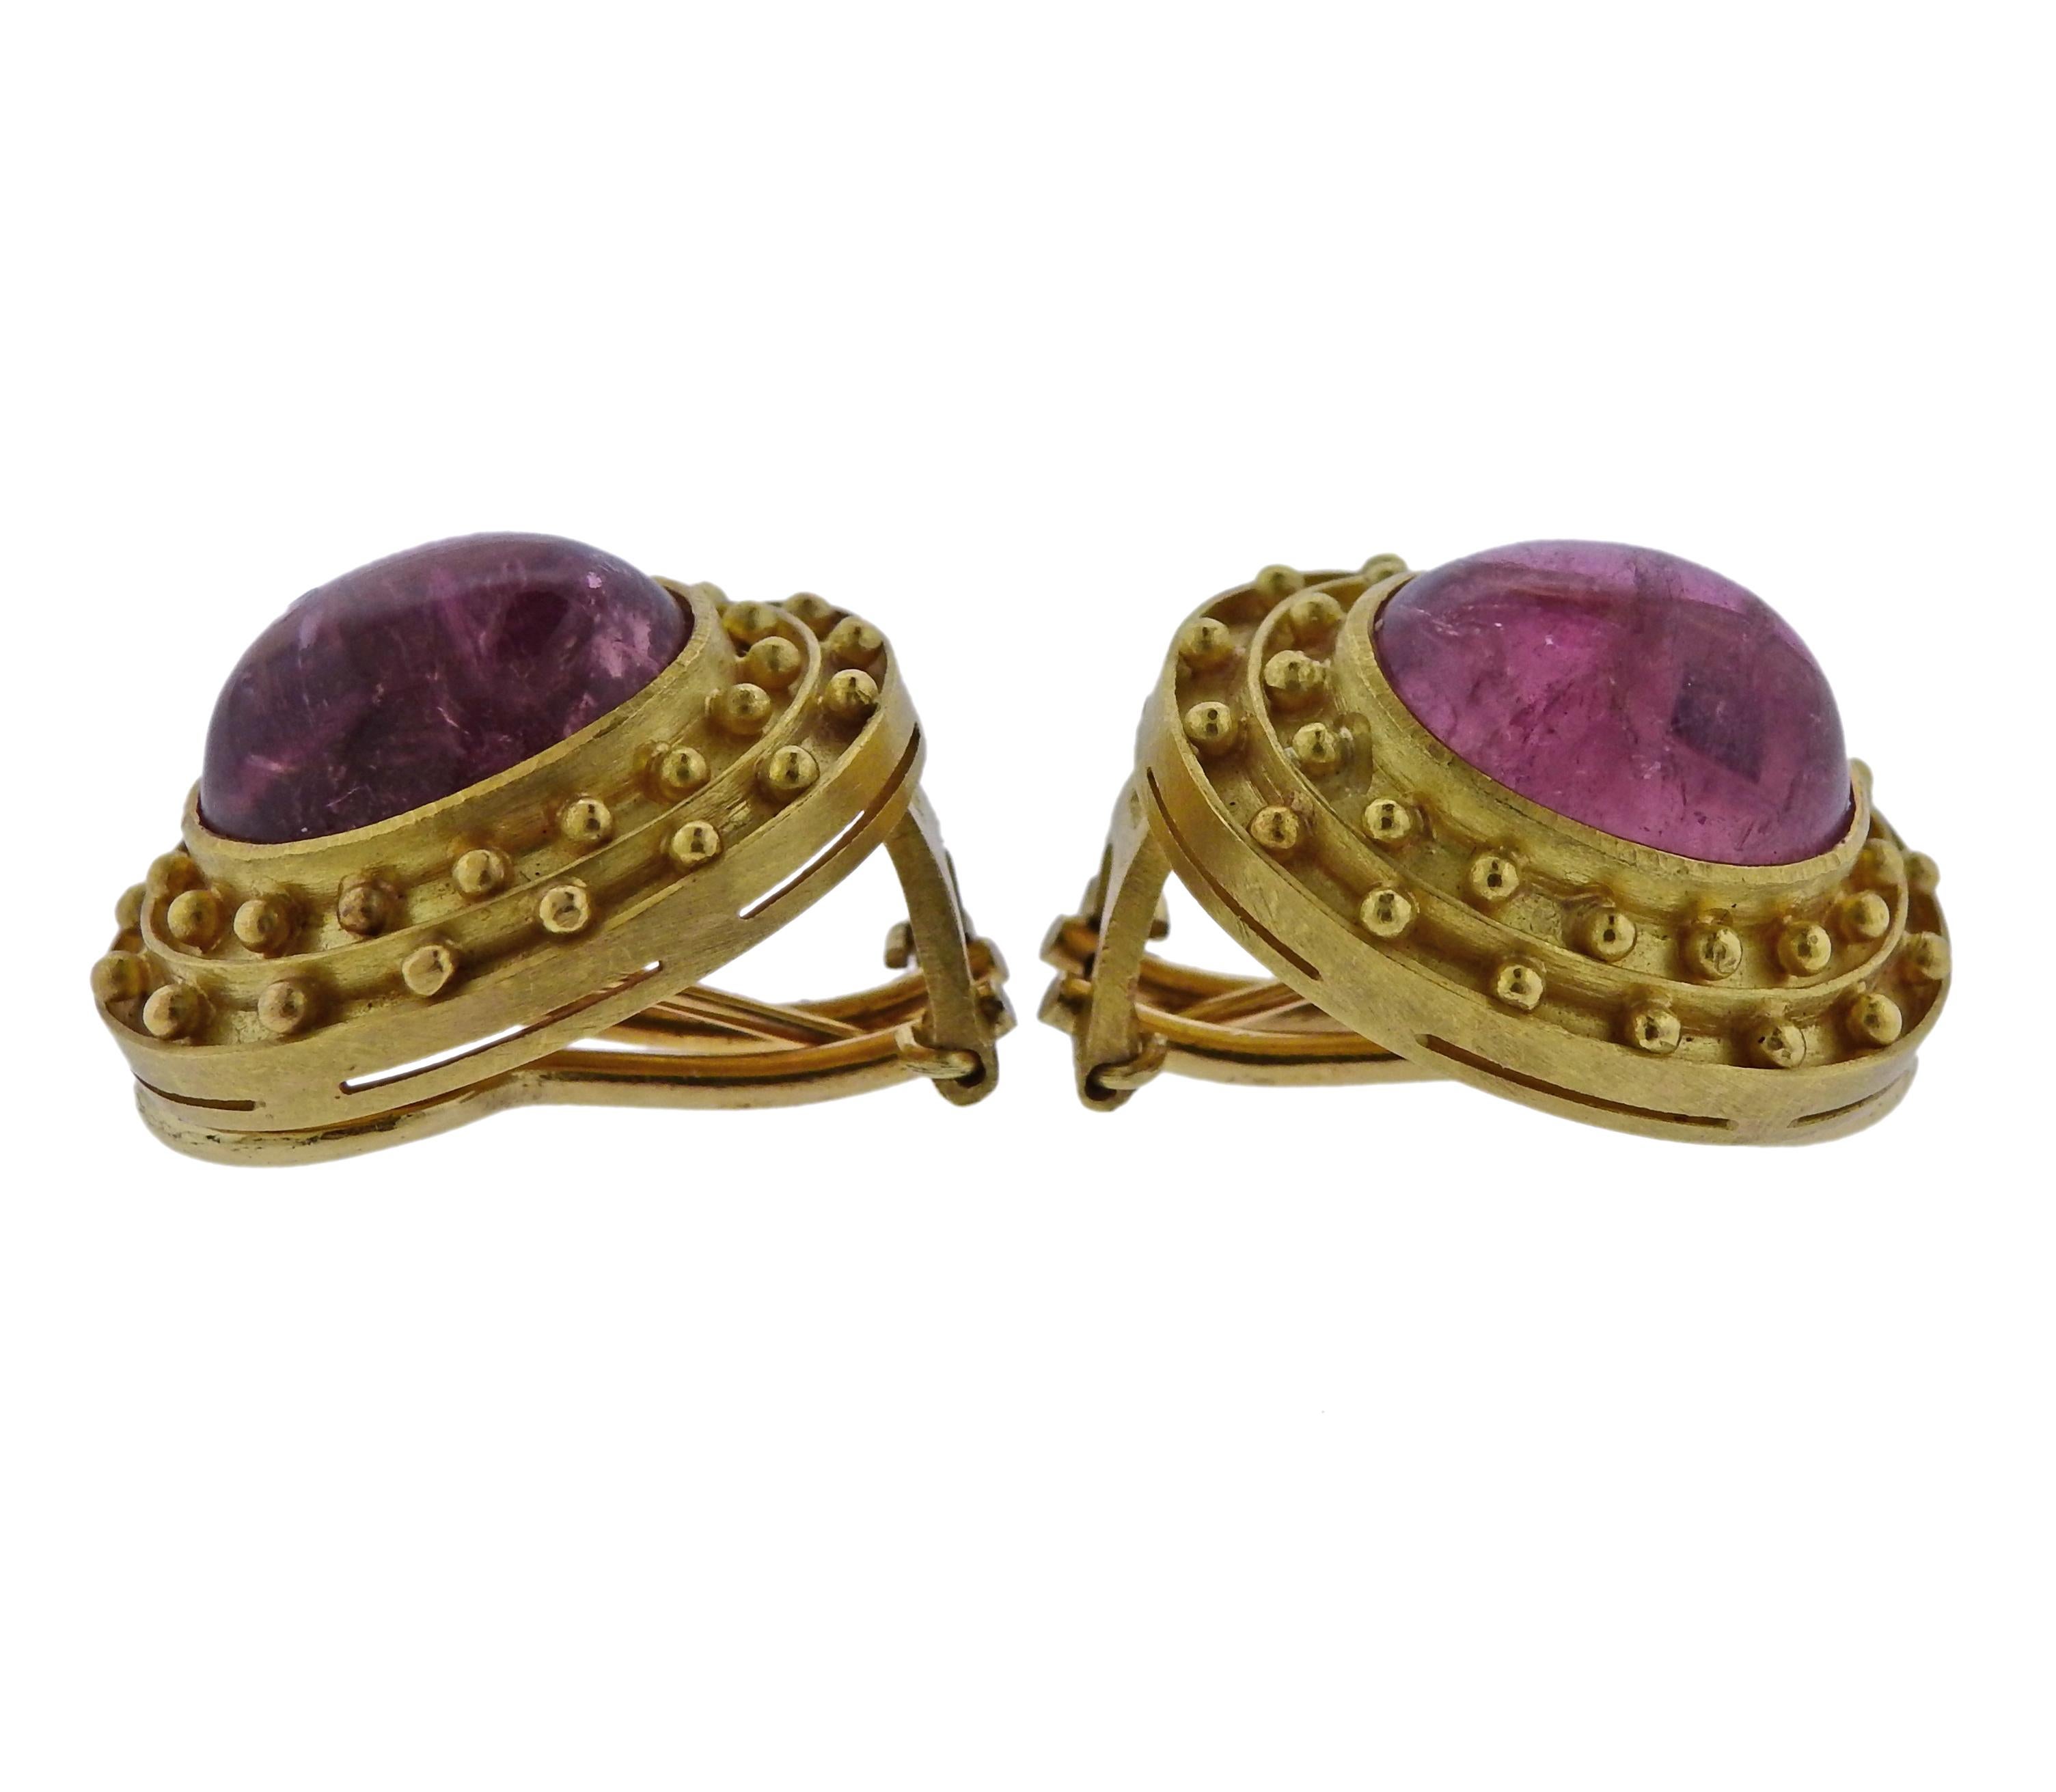 A pair of 18k yellow gold oval earrings by Elizabeth Locke, set with 13.8mm x 11.8mm pink tourmaline cabochons.  Earrings are 22mm x 20mm, collapsible posts, weigh 19.3 grams. Marked: E hallmark, 18k.